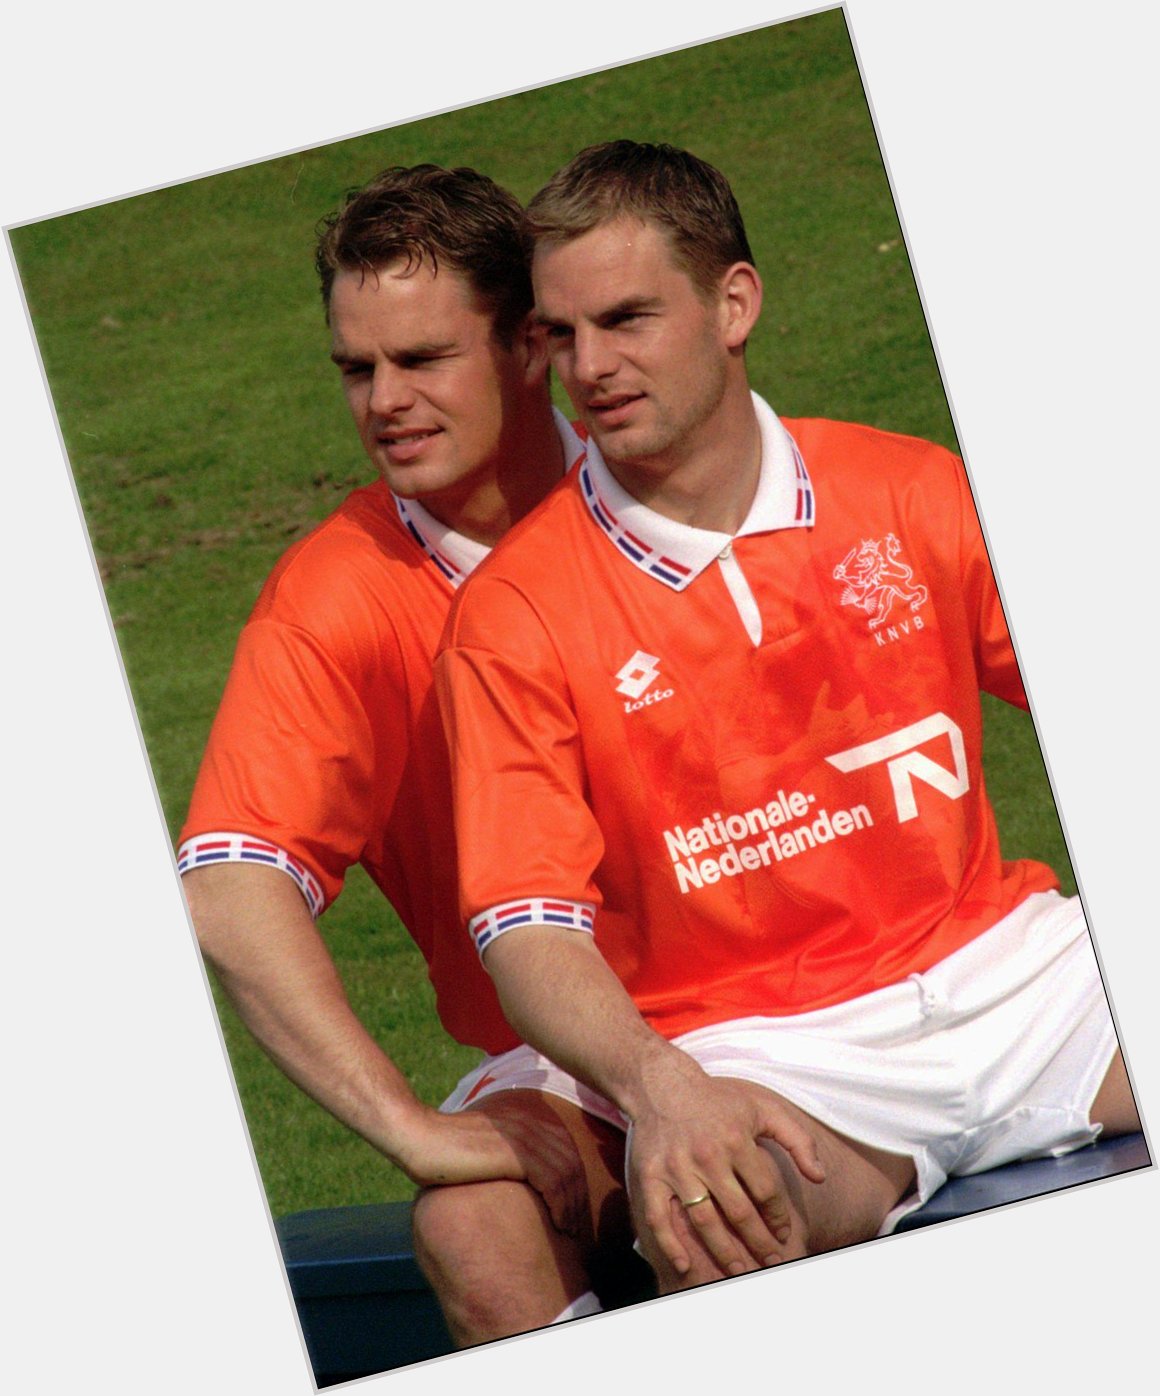 179 caps and 17 league titles between them

Happy 45th birthday to Ronald and Frank de Boer 